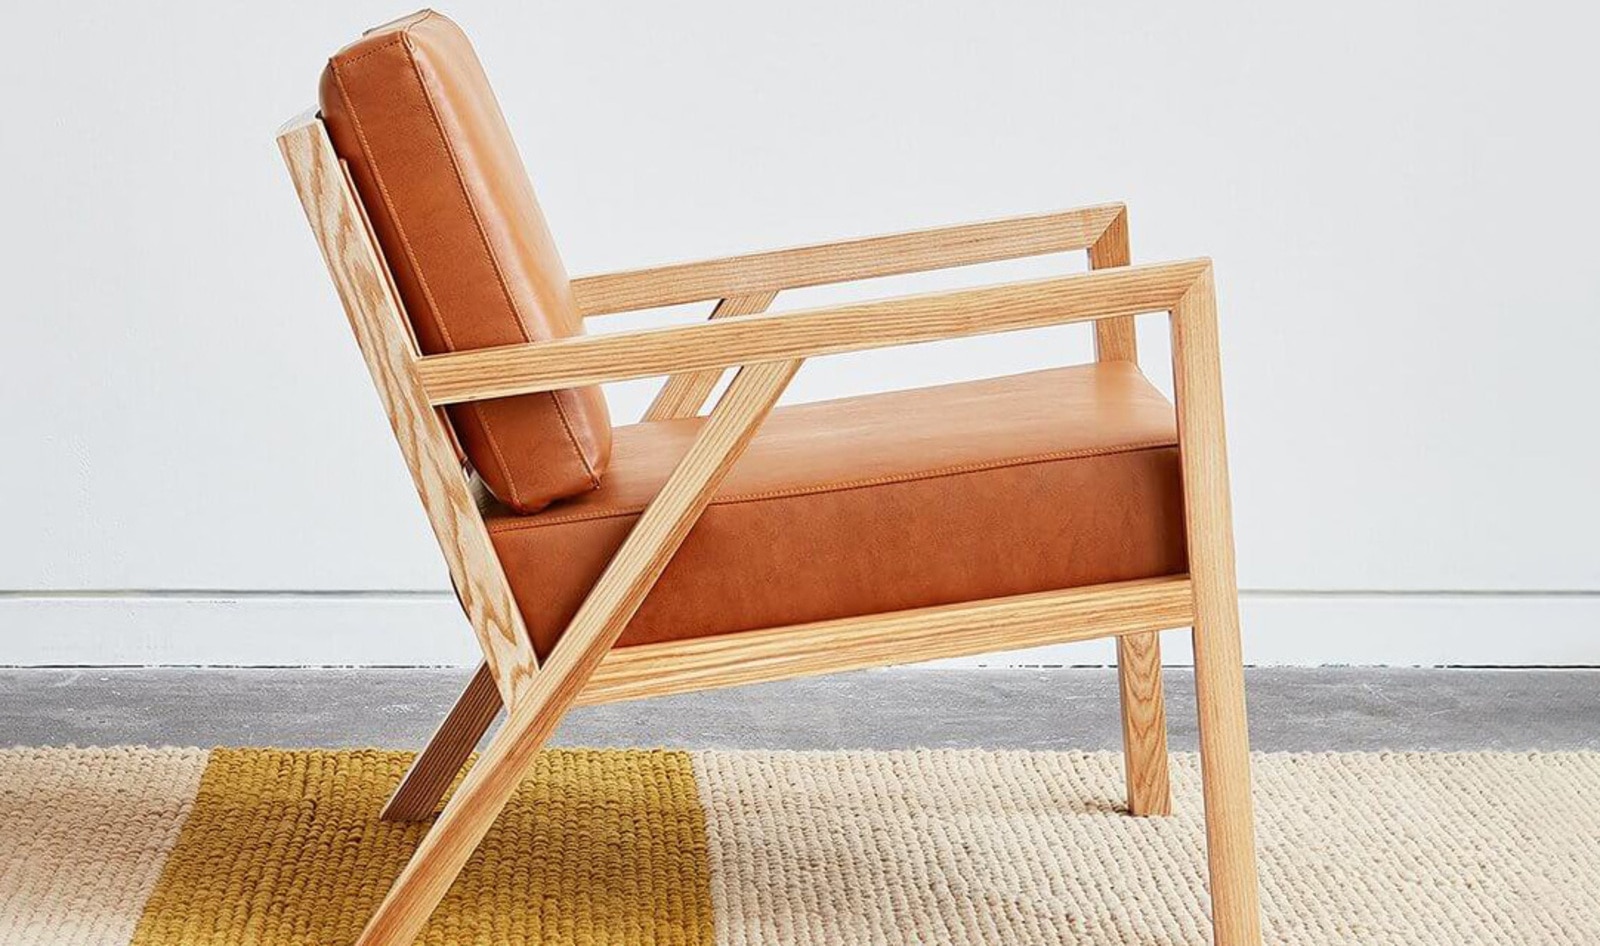 This New Designer Furniture Is Vegan and Made from Apple Peels | VegNews